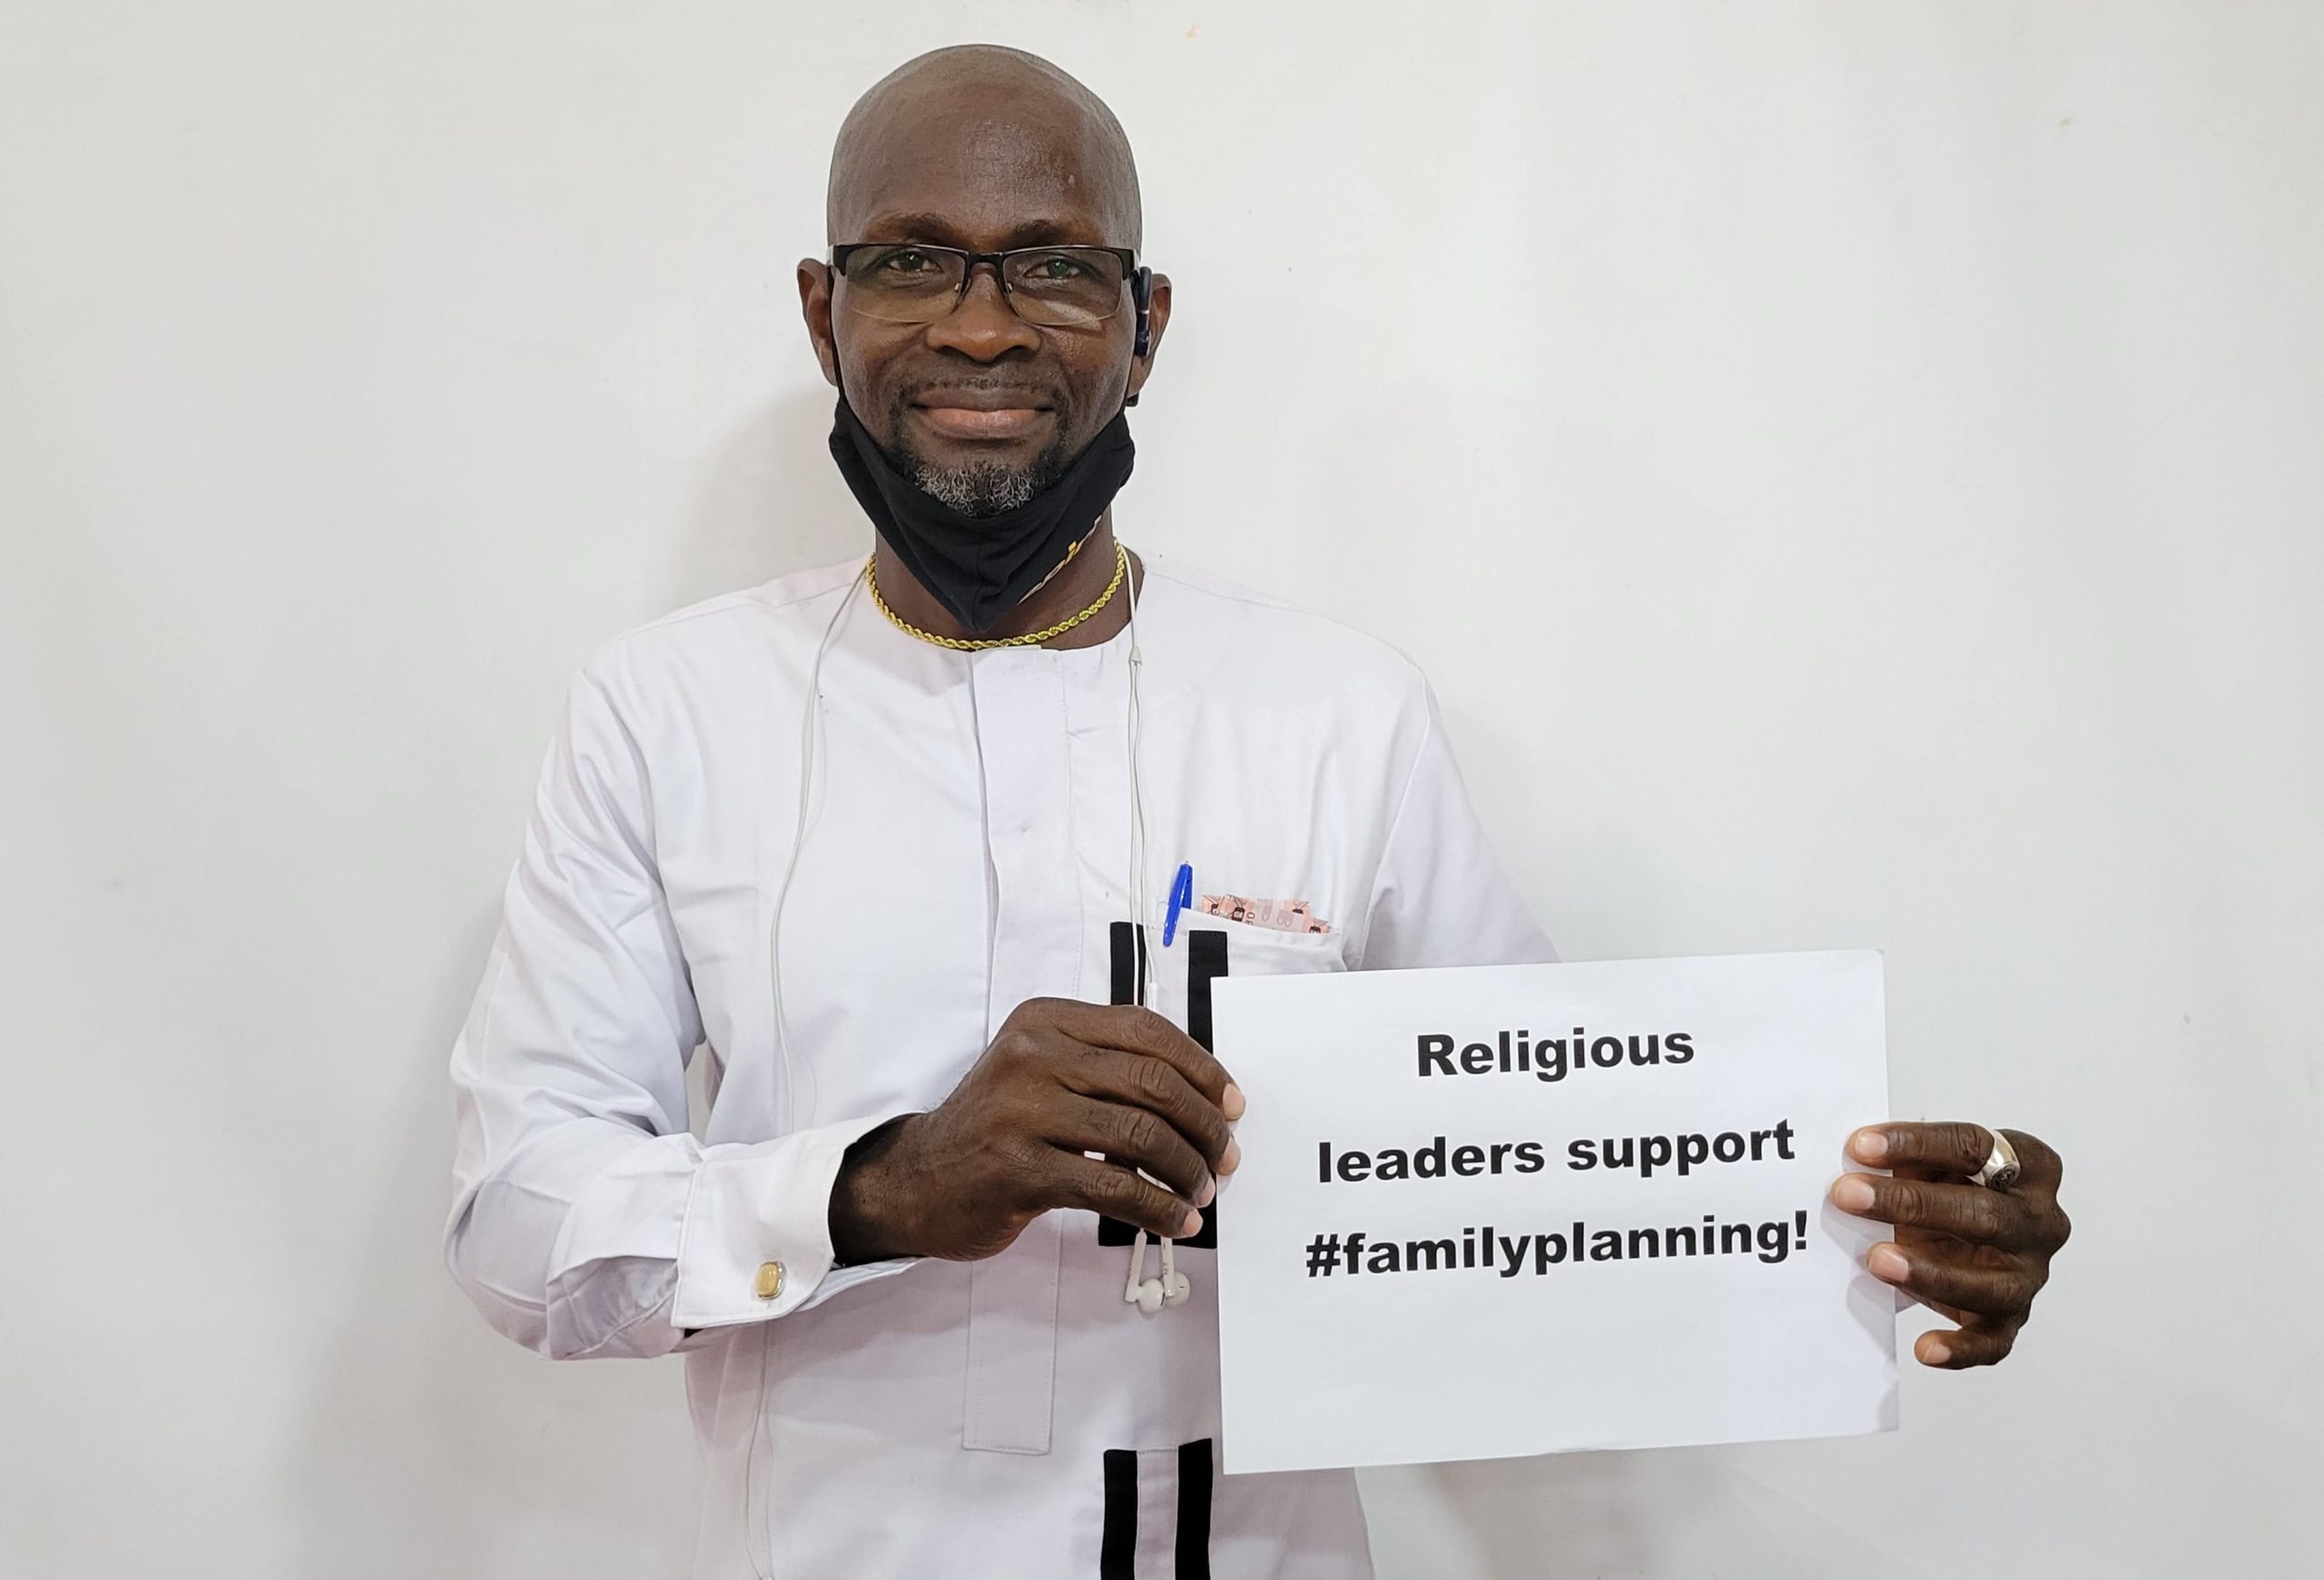 A man holds a sign expressing support for family planning by religious leaders.